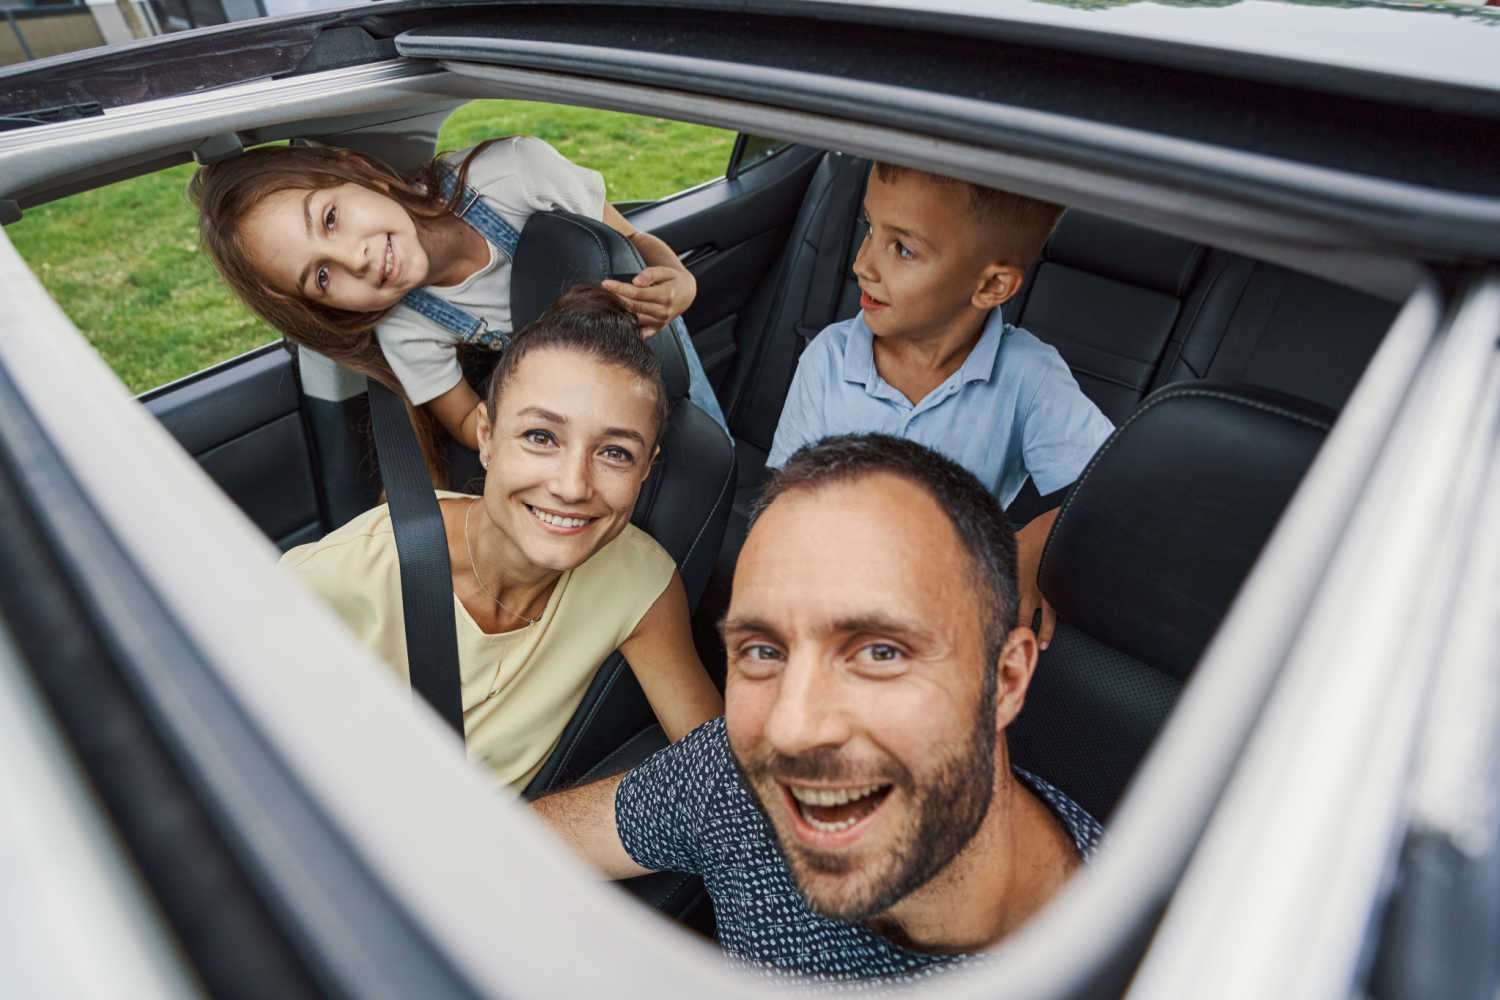 Safety For Children While Using Cars With Sunroofs